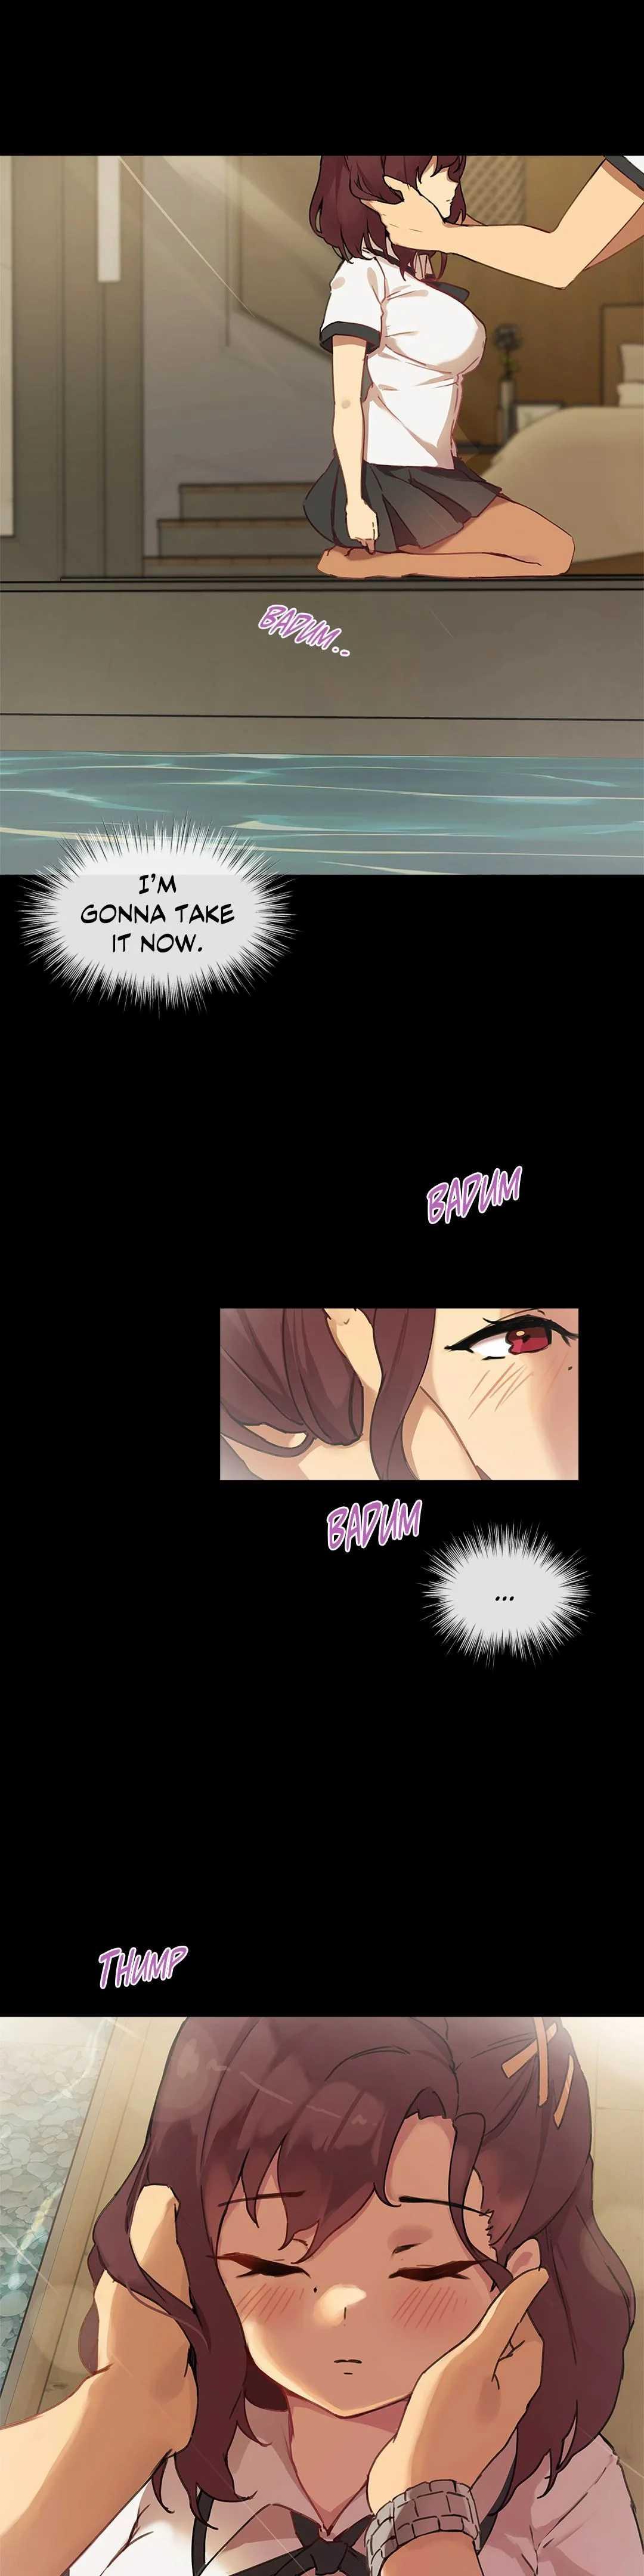 [Dumangoon, 130F] Sexcape Room: Wipe Out Ch.9/9 [English] [Manhwa PDF] Completed 3